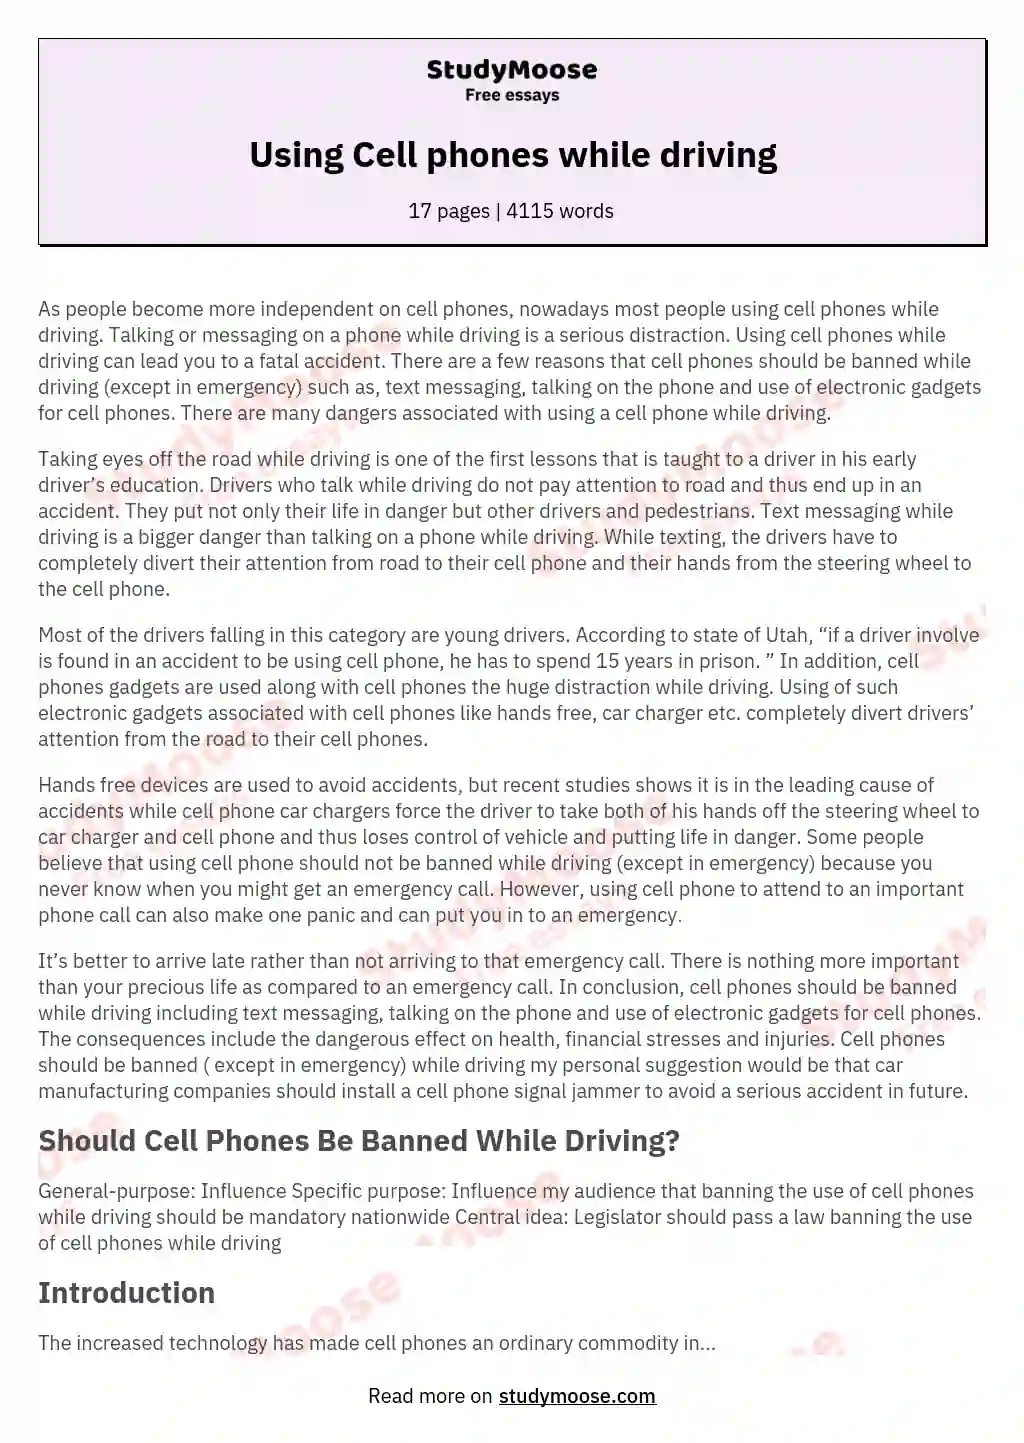 Using Cell phones while driving essay